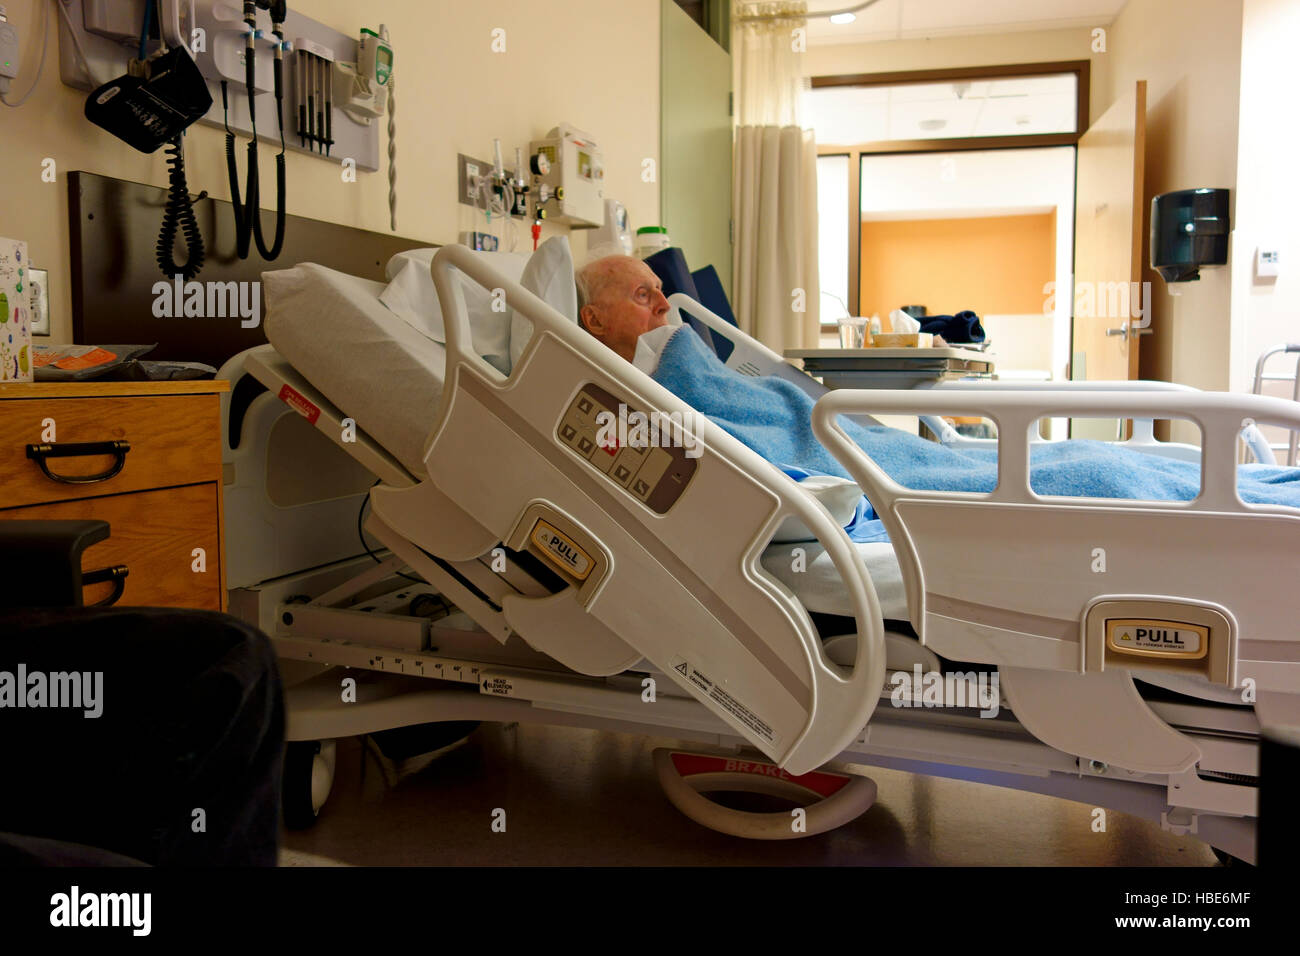 An elderly man lying in a bed in a hospital showing bed, room and equipment Stock Photo